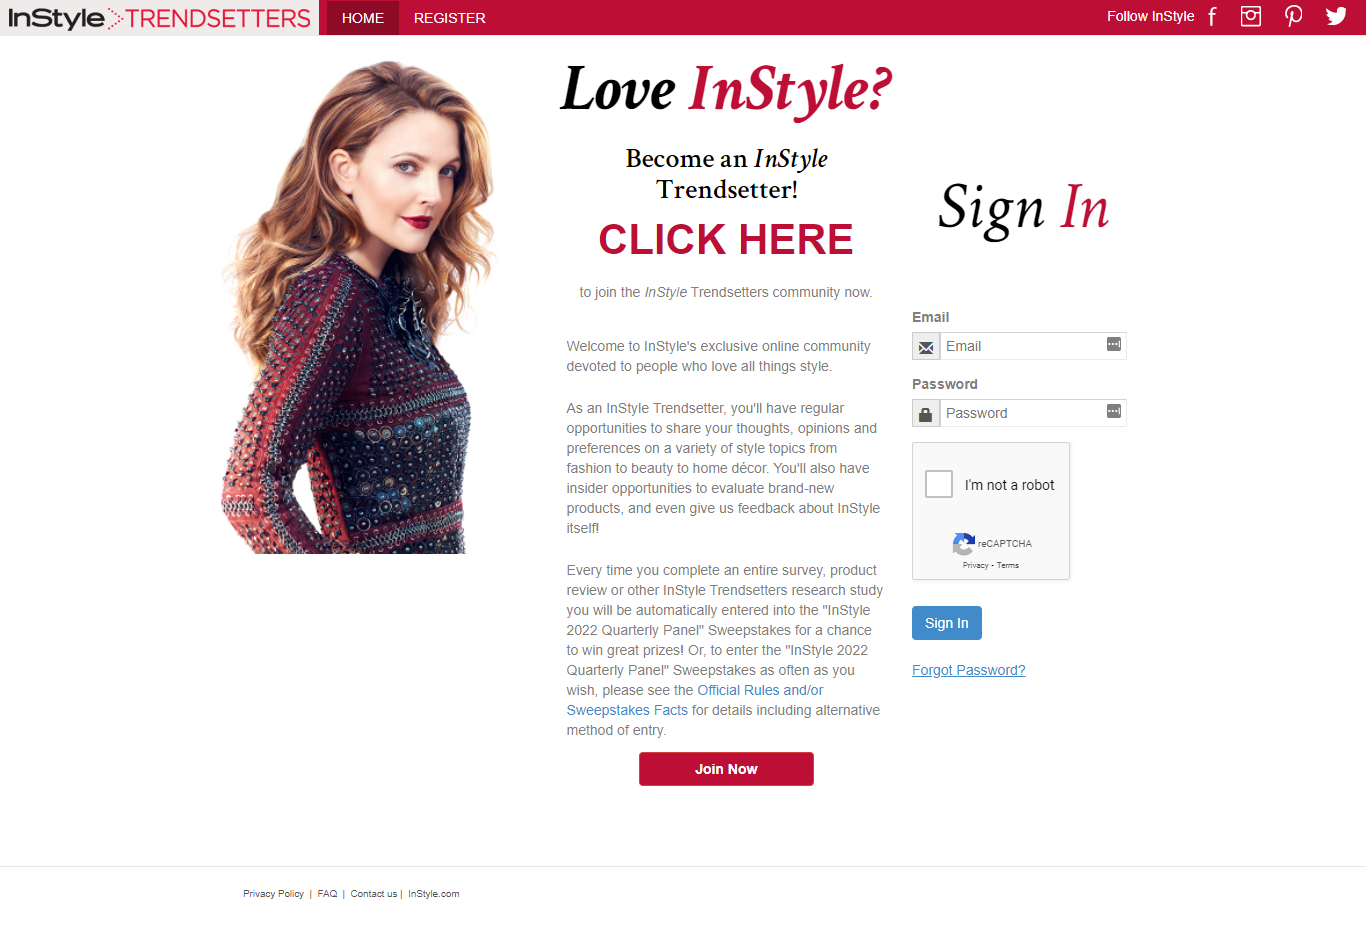 Love Instyle, a site where you can get free beauty products to review and test!